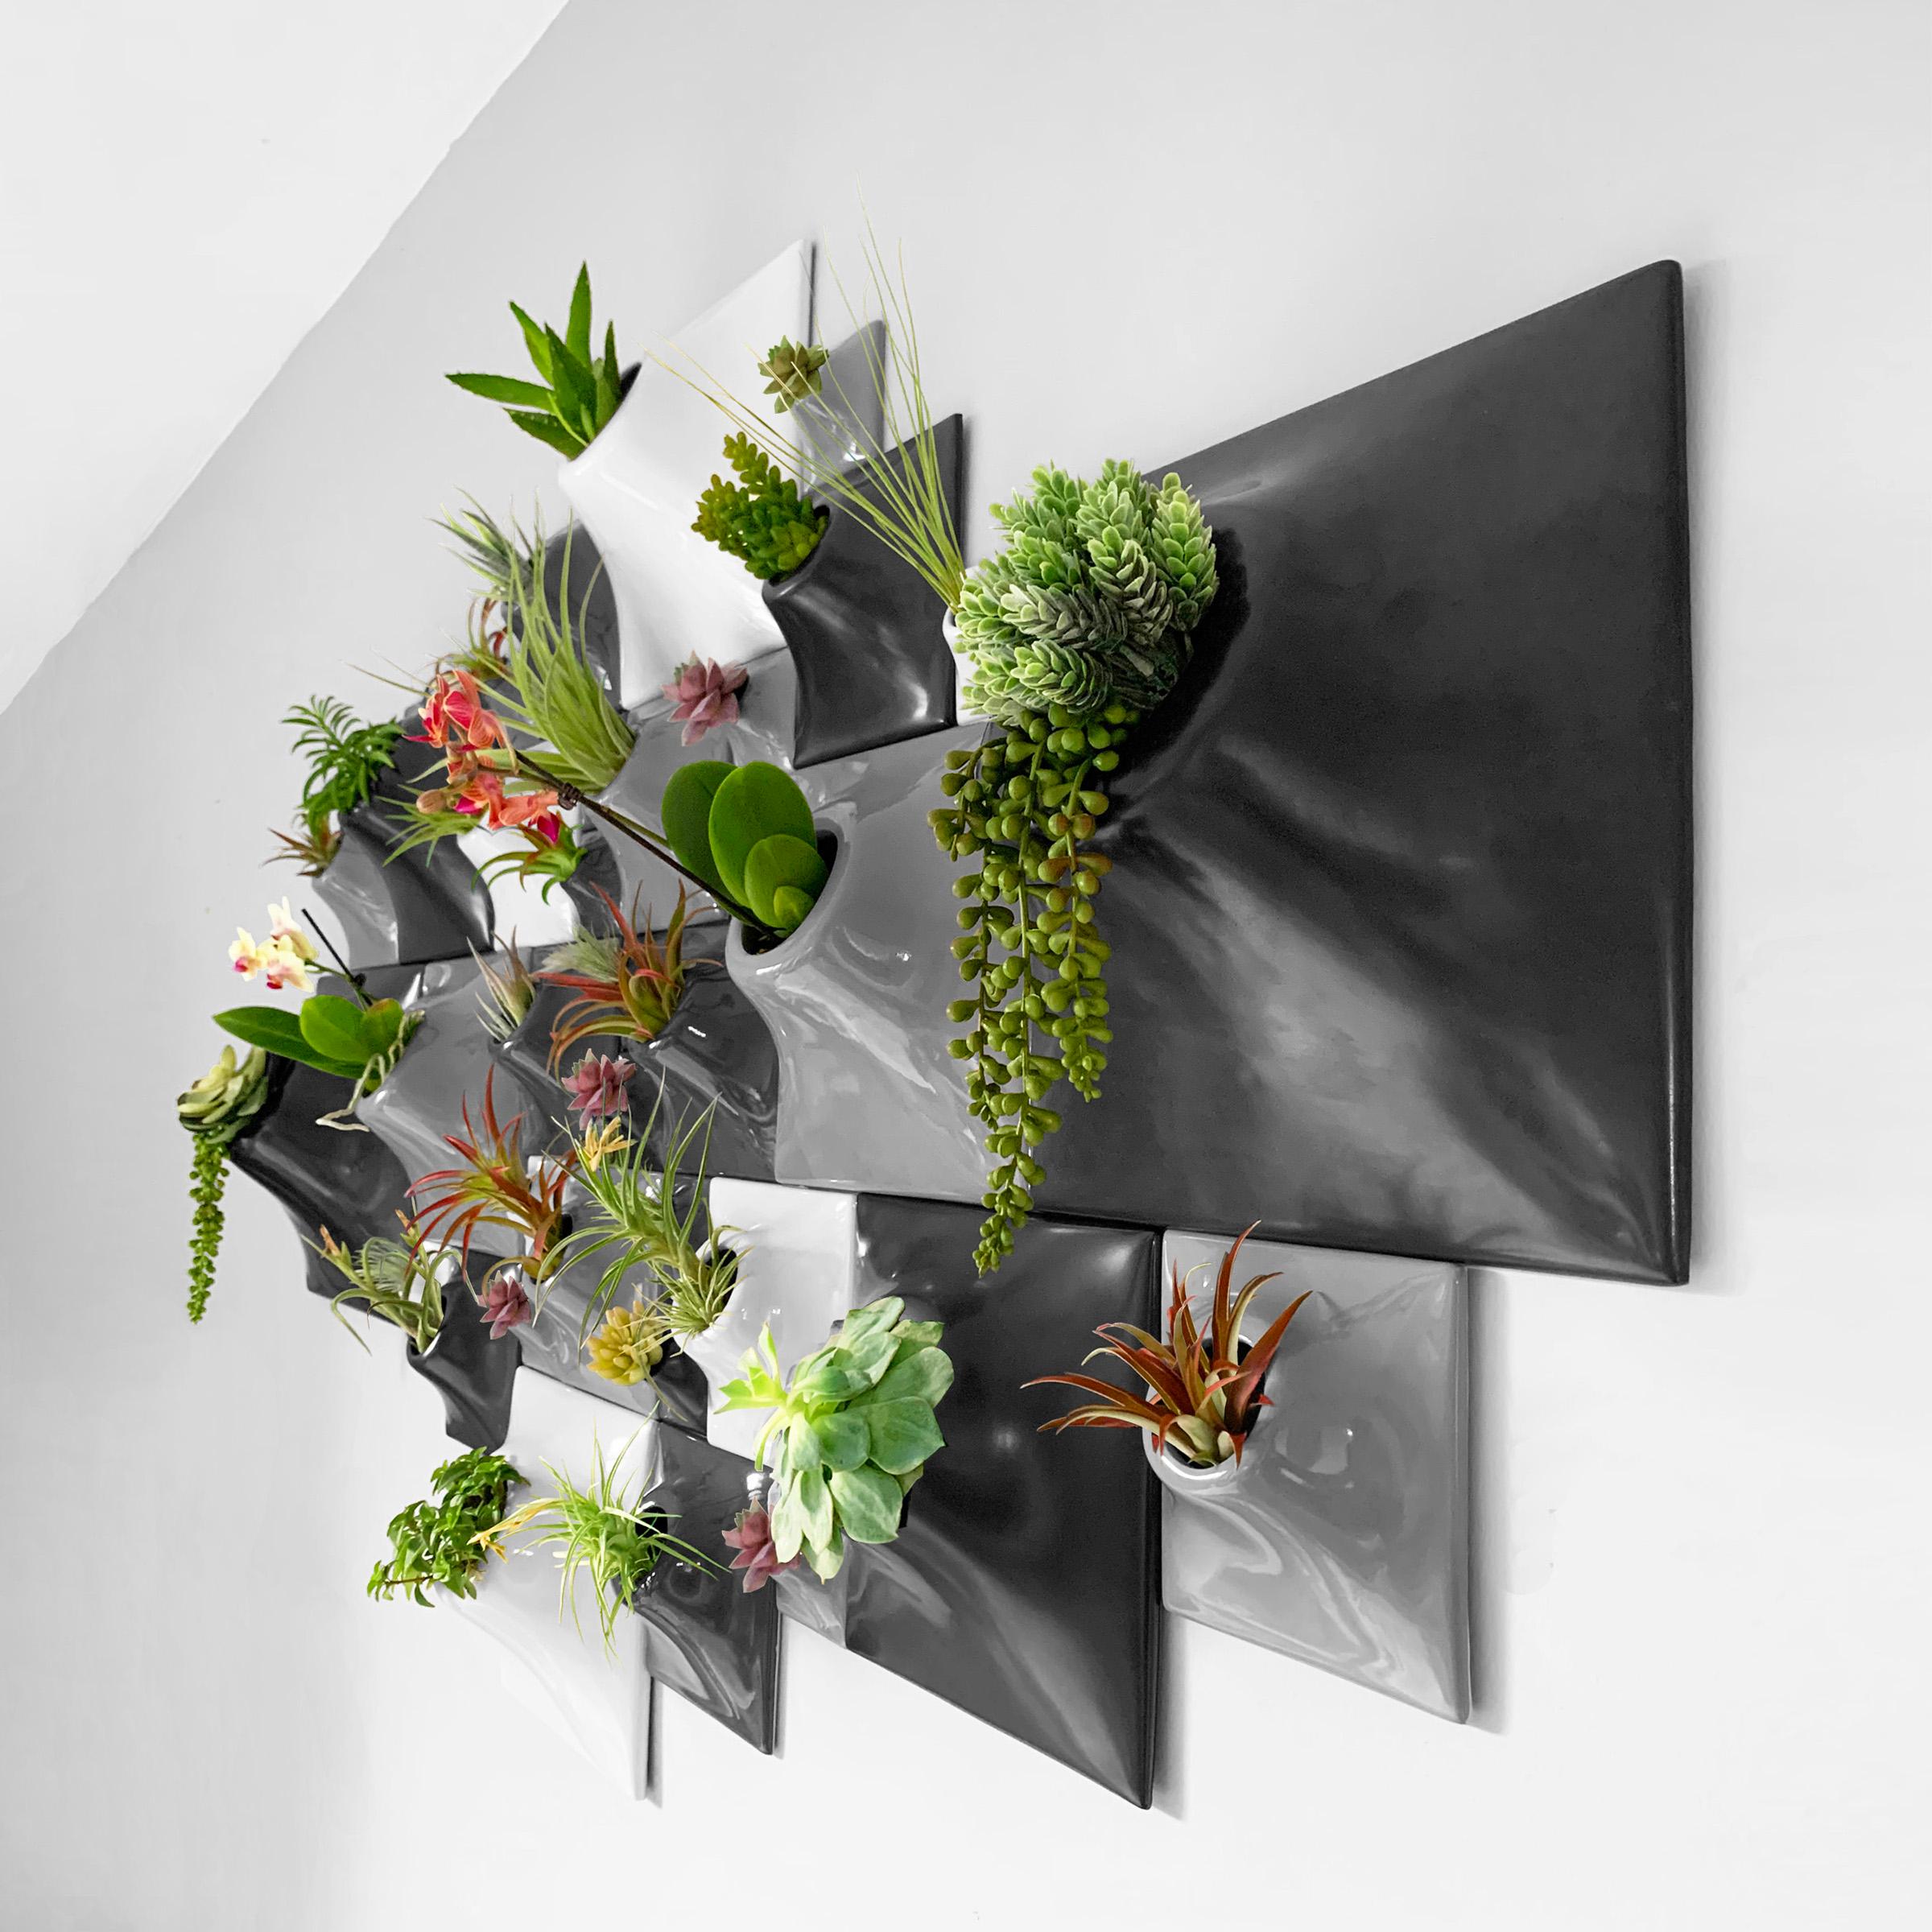 Contemporary Modern Wall Sculpture, Wall Art Installation, Living Wall Decor, Price per Sq Ft For Sale